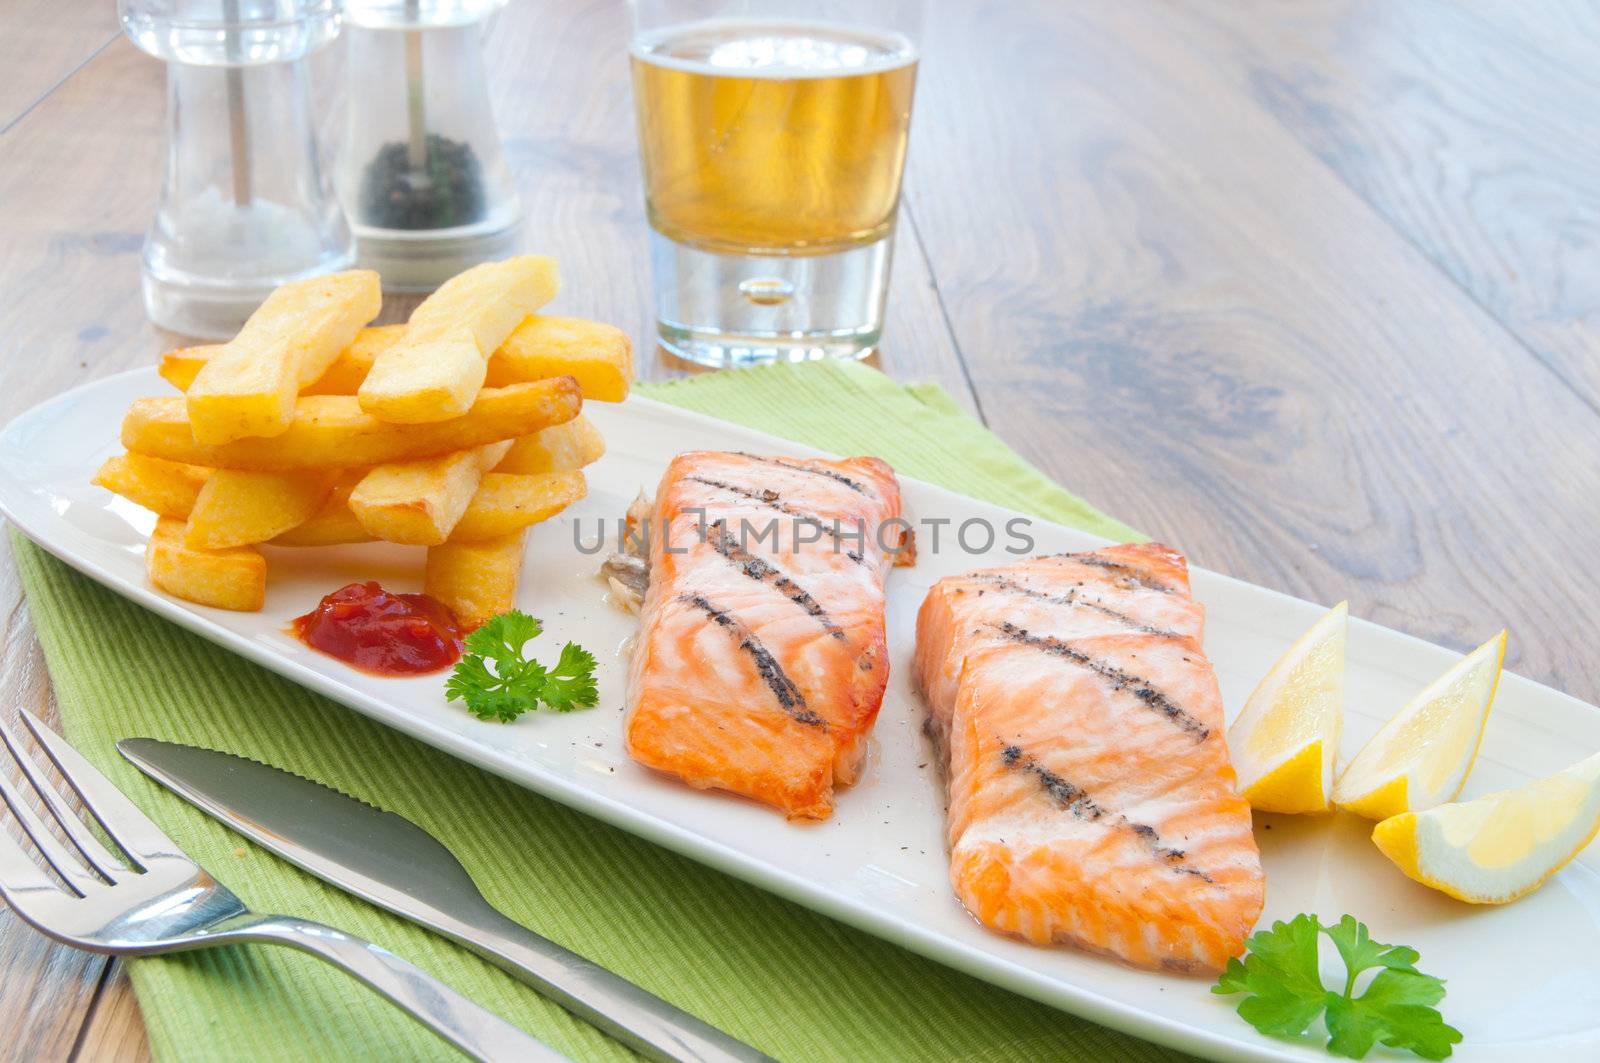 Grilled salmon fillets with chips 